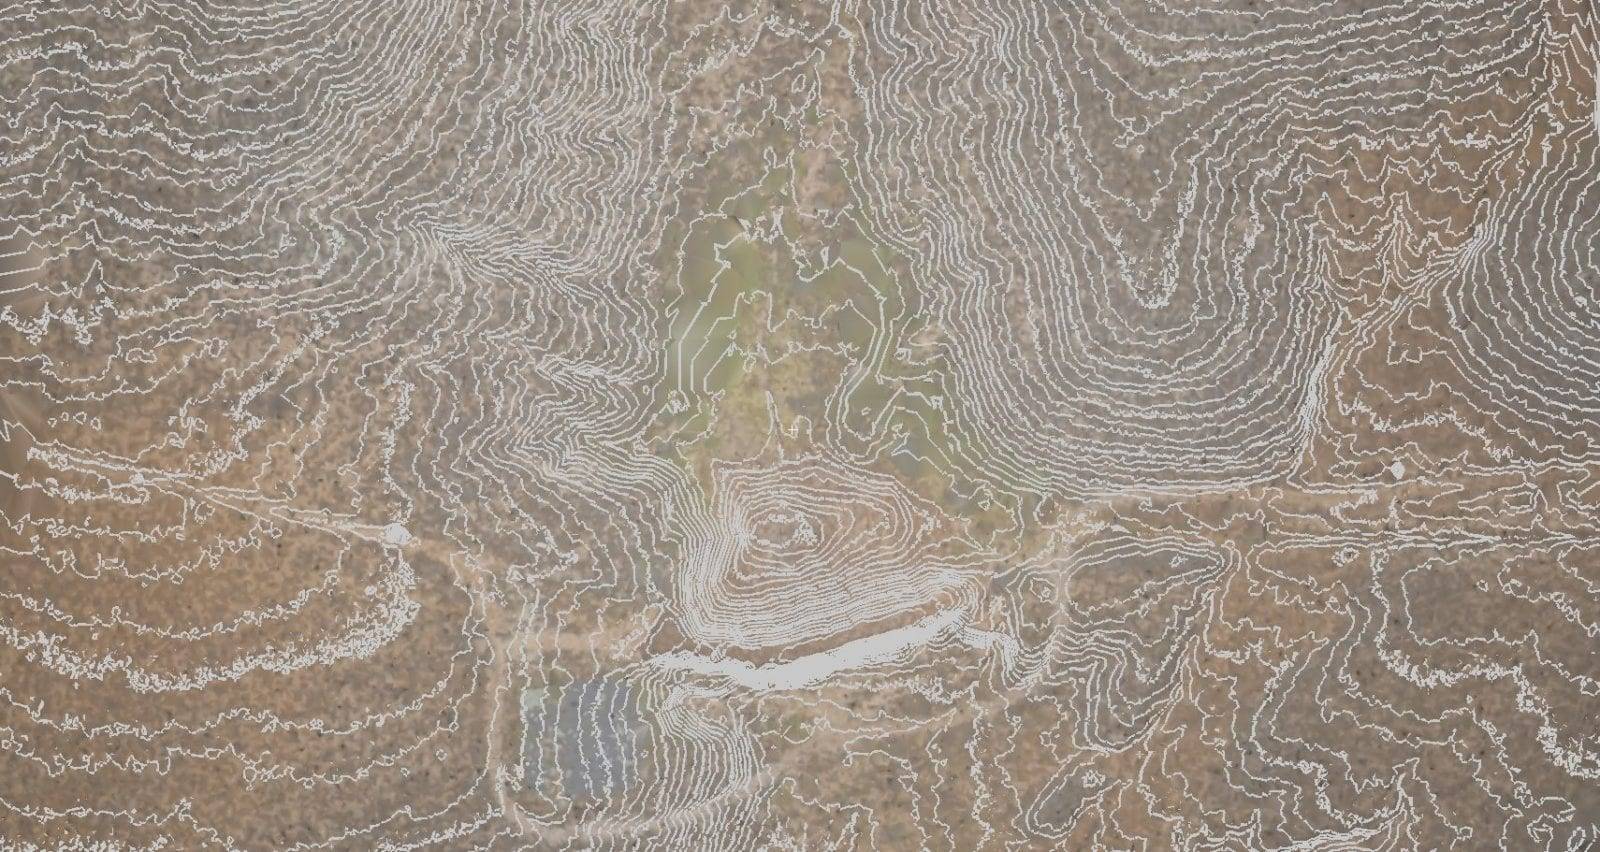 topographic map from data captured by one of our drones in Arizona